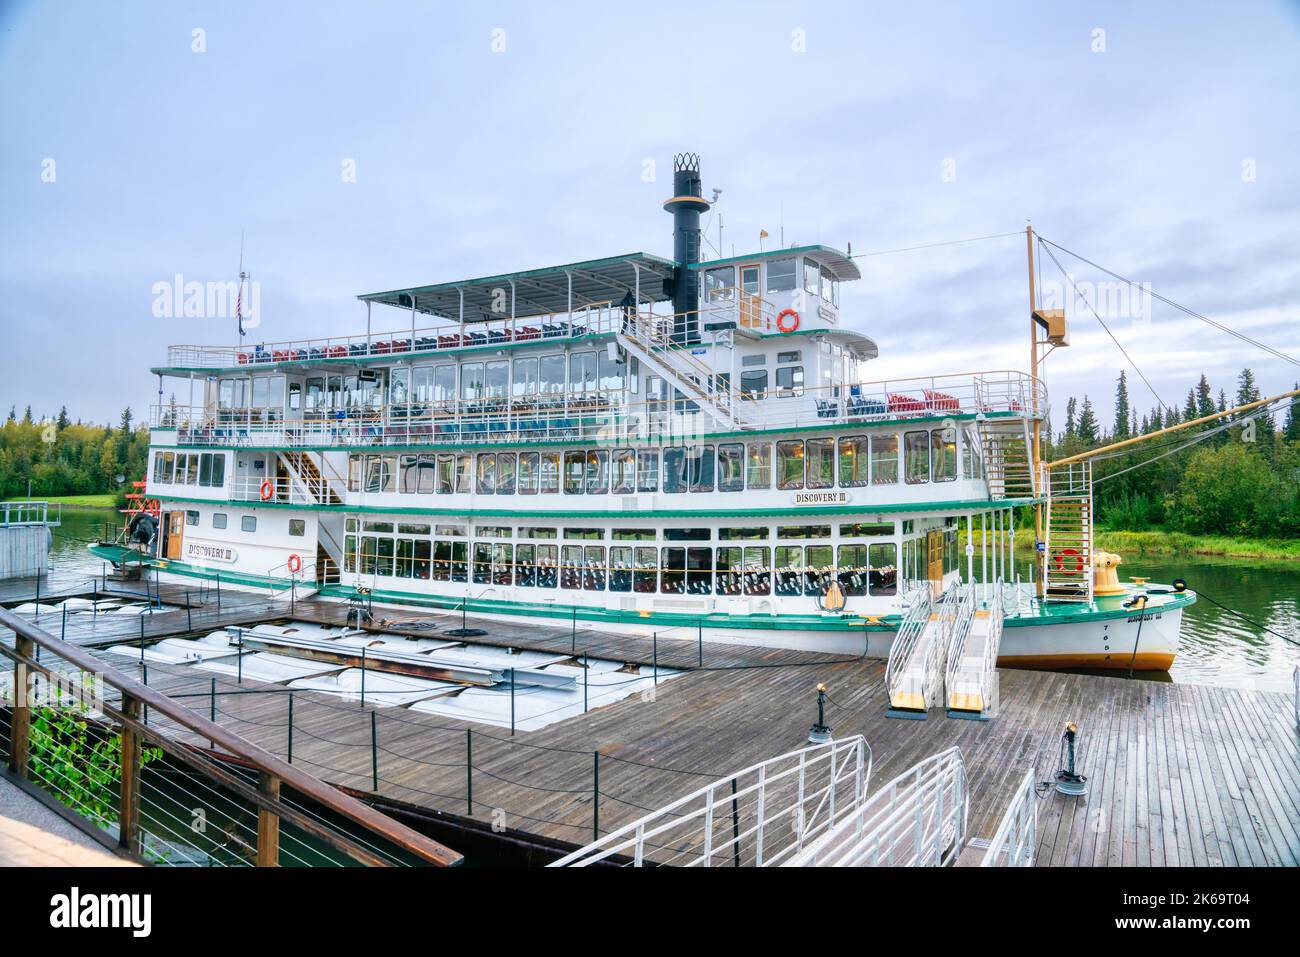 Fairbanks, Alaska - August 27, 2022: Riverboat Discovery III docked at Steamboat landing in Fairbanks, Alaska. The stern wheel boat is owned by the Bi Stock Photo